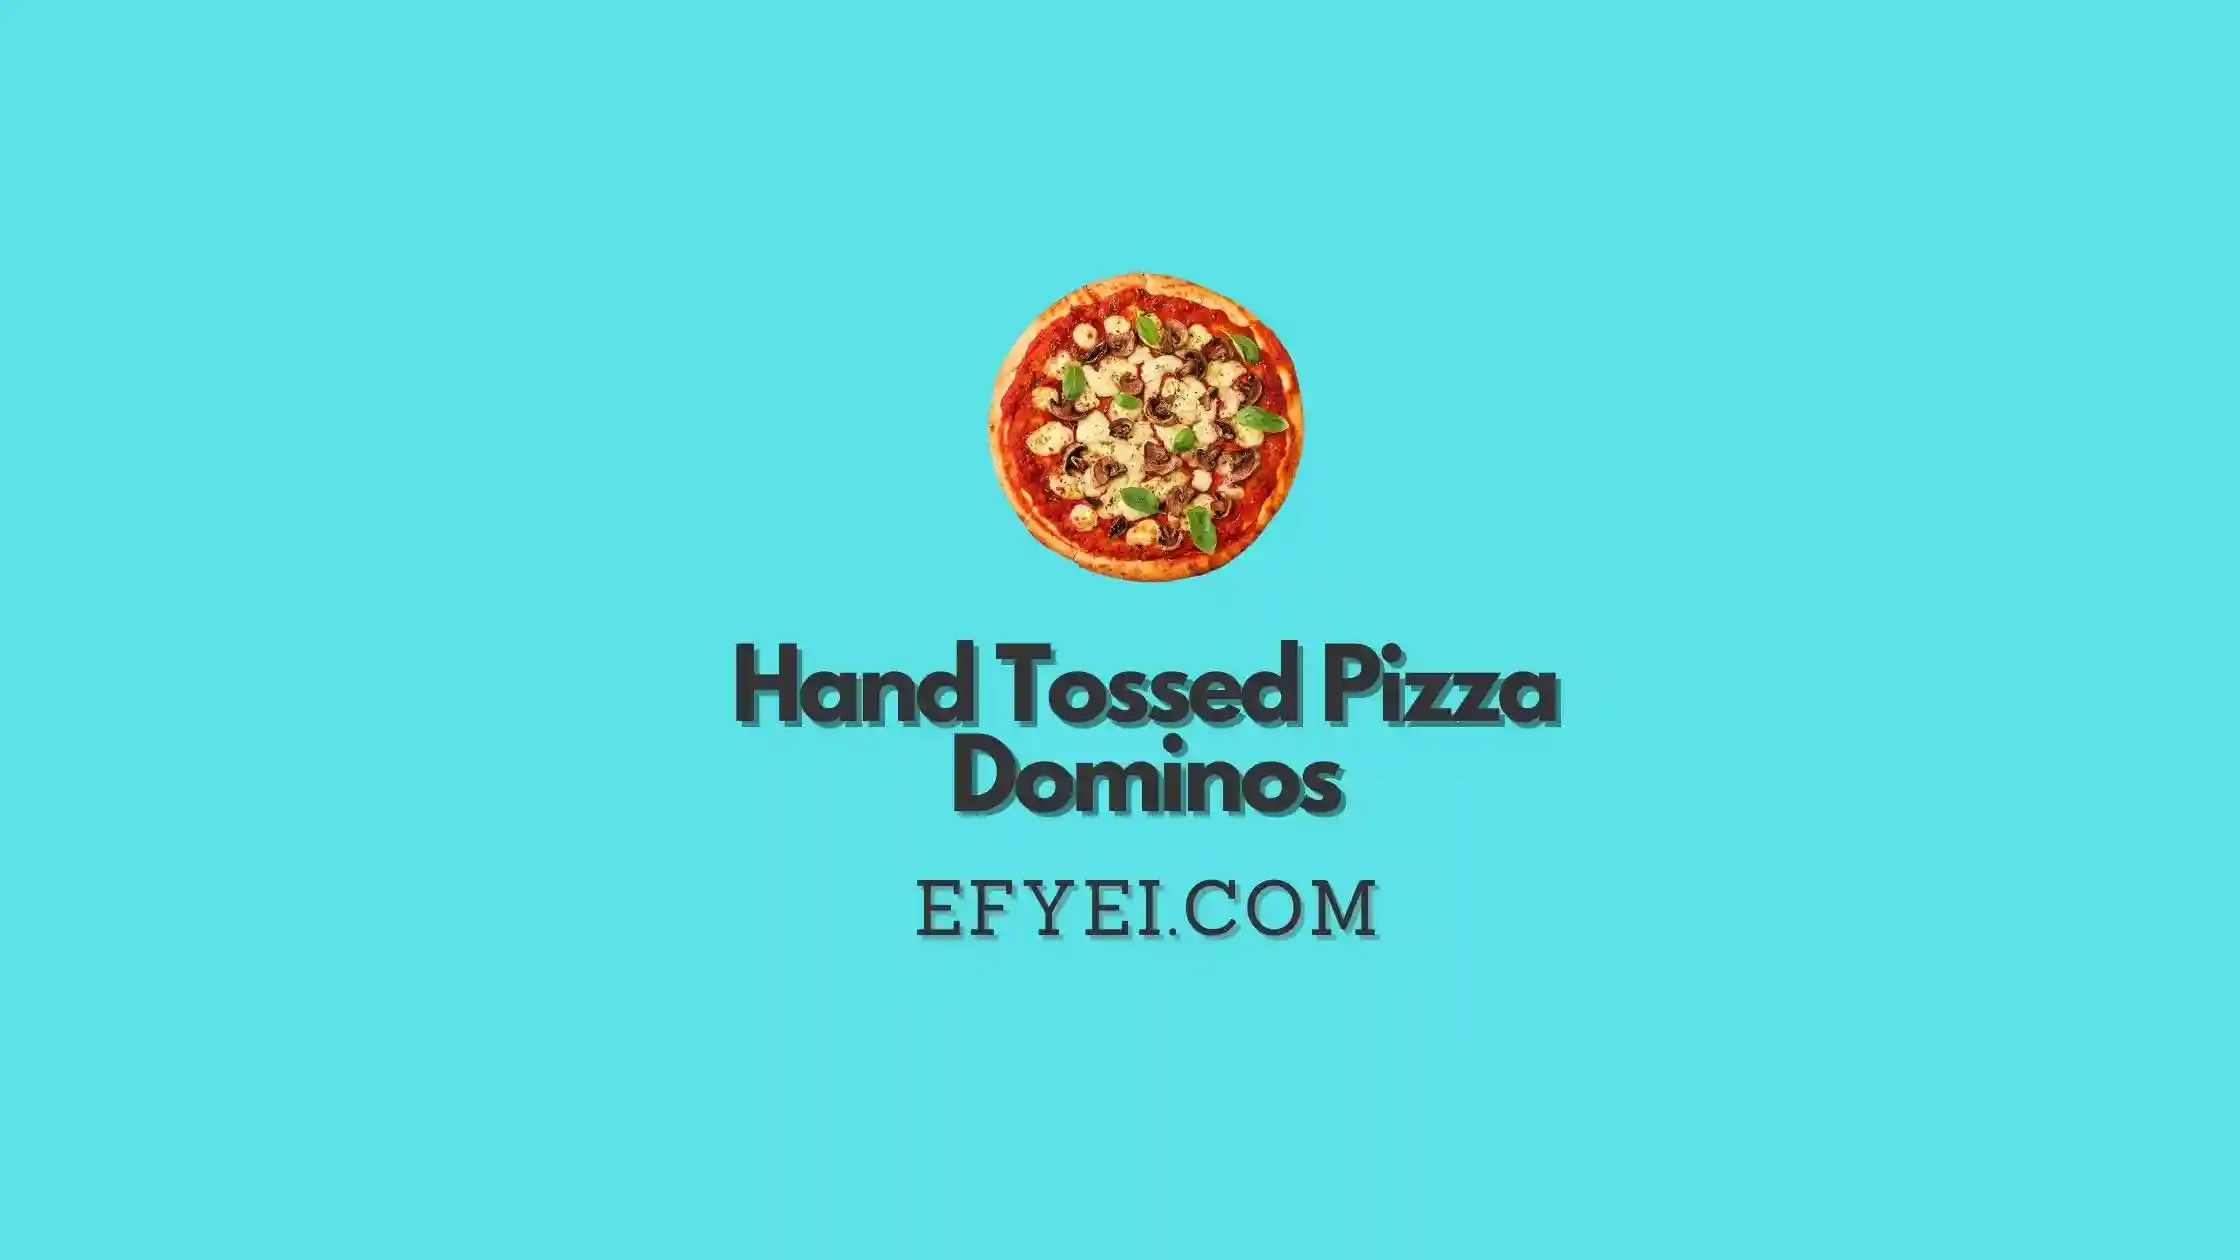 Hand Tossed Pizza Dominos